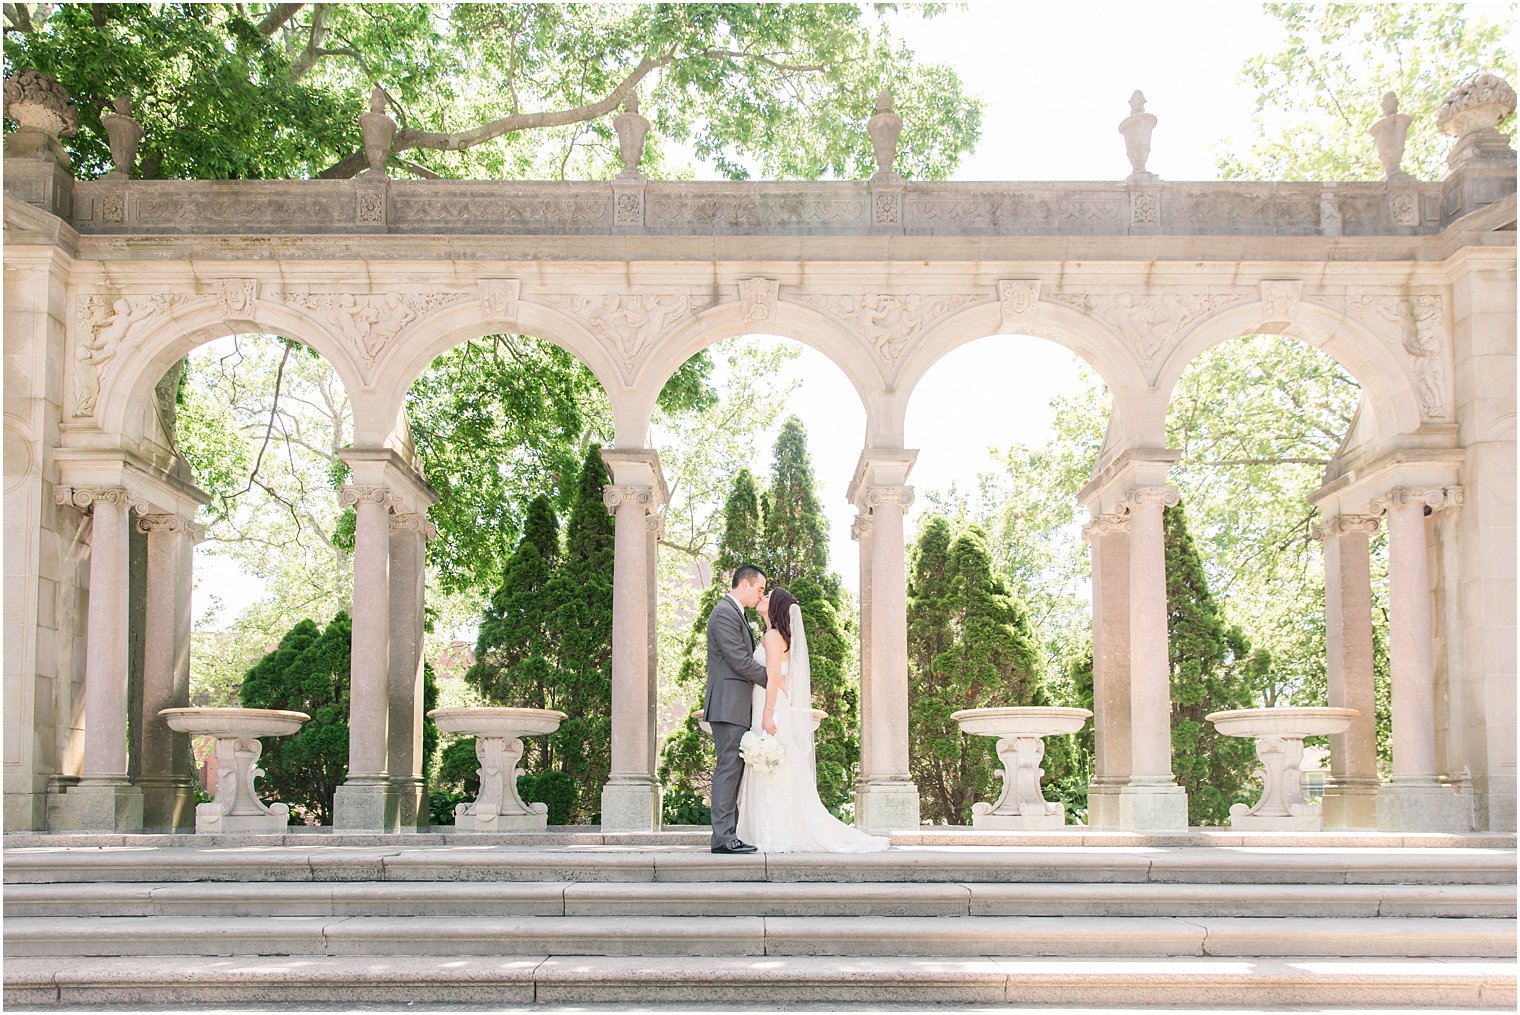 Romantic bride and groom portrait at Monmouth University